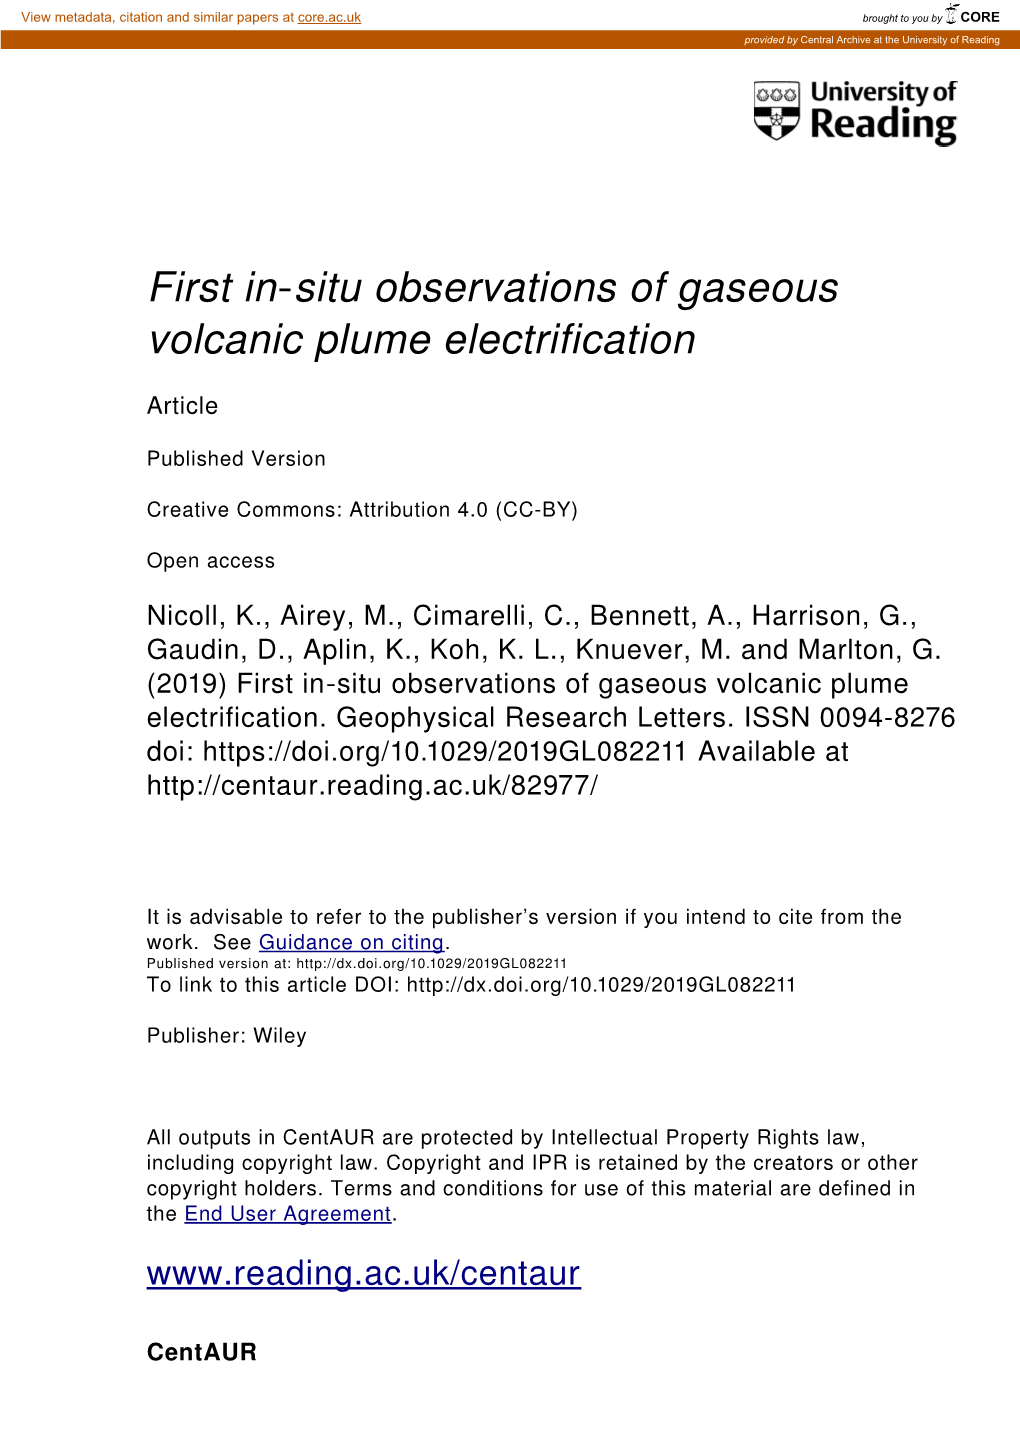 First in Situ Observations of Gaseous Volcanic Plume Electrification